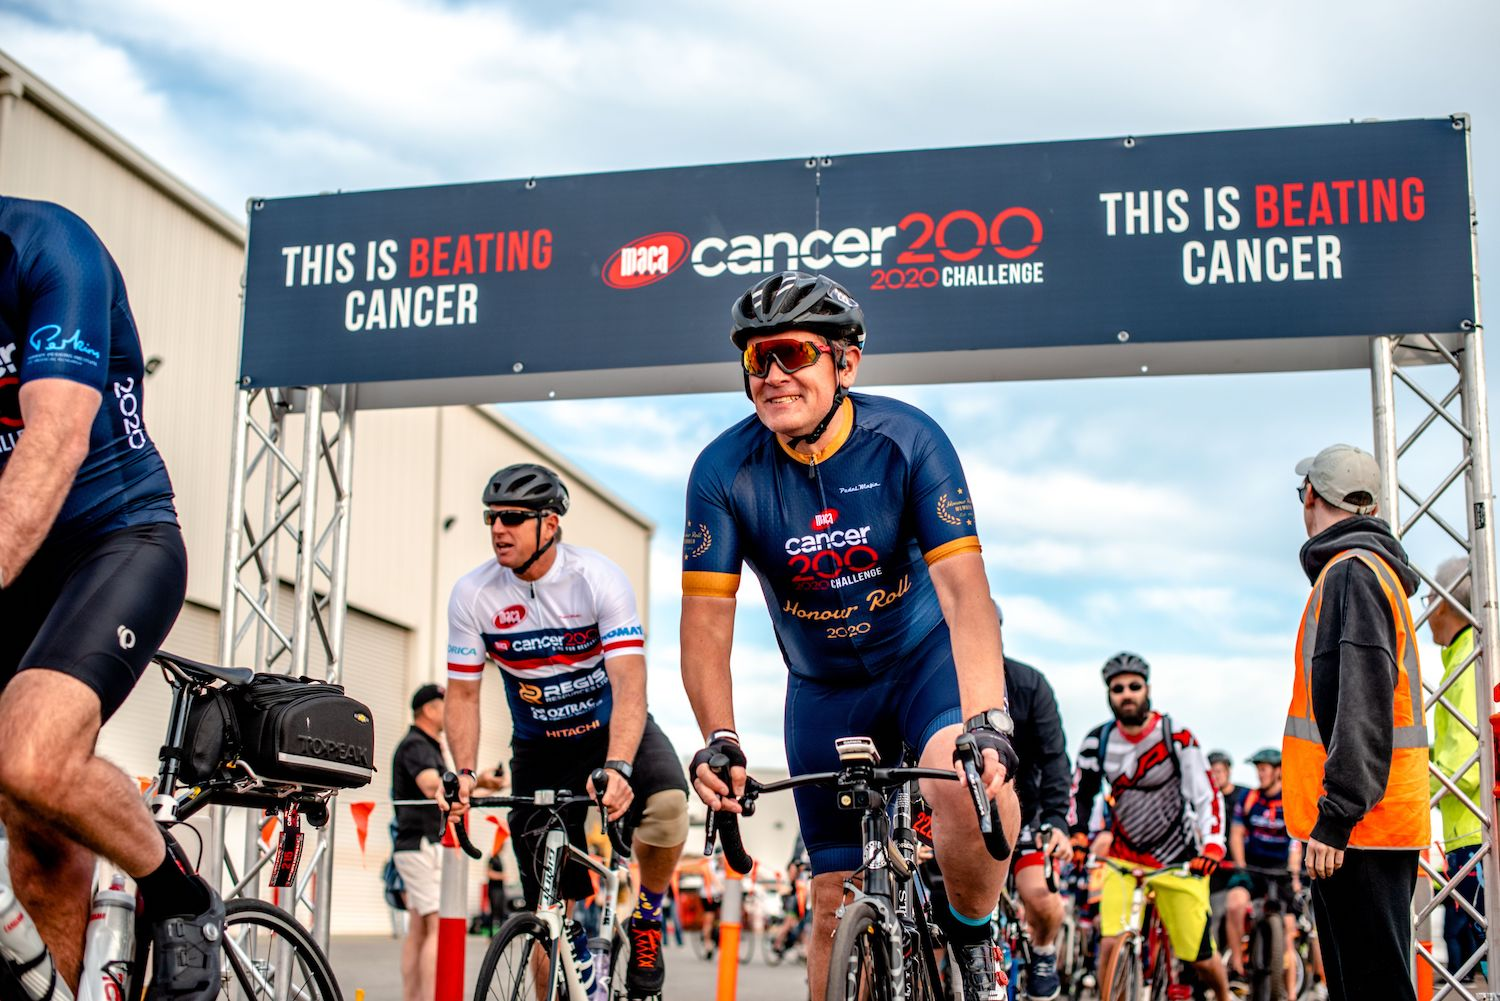 MACA 200 Cancer Ride For Research